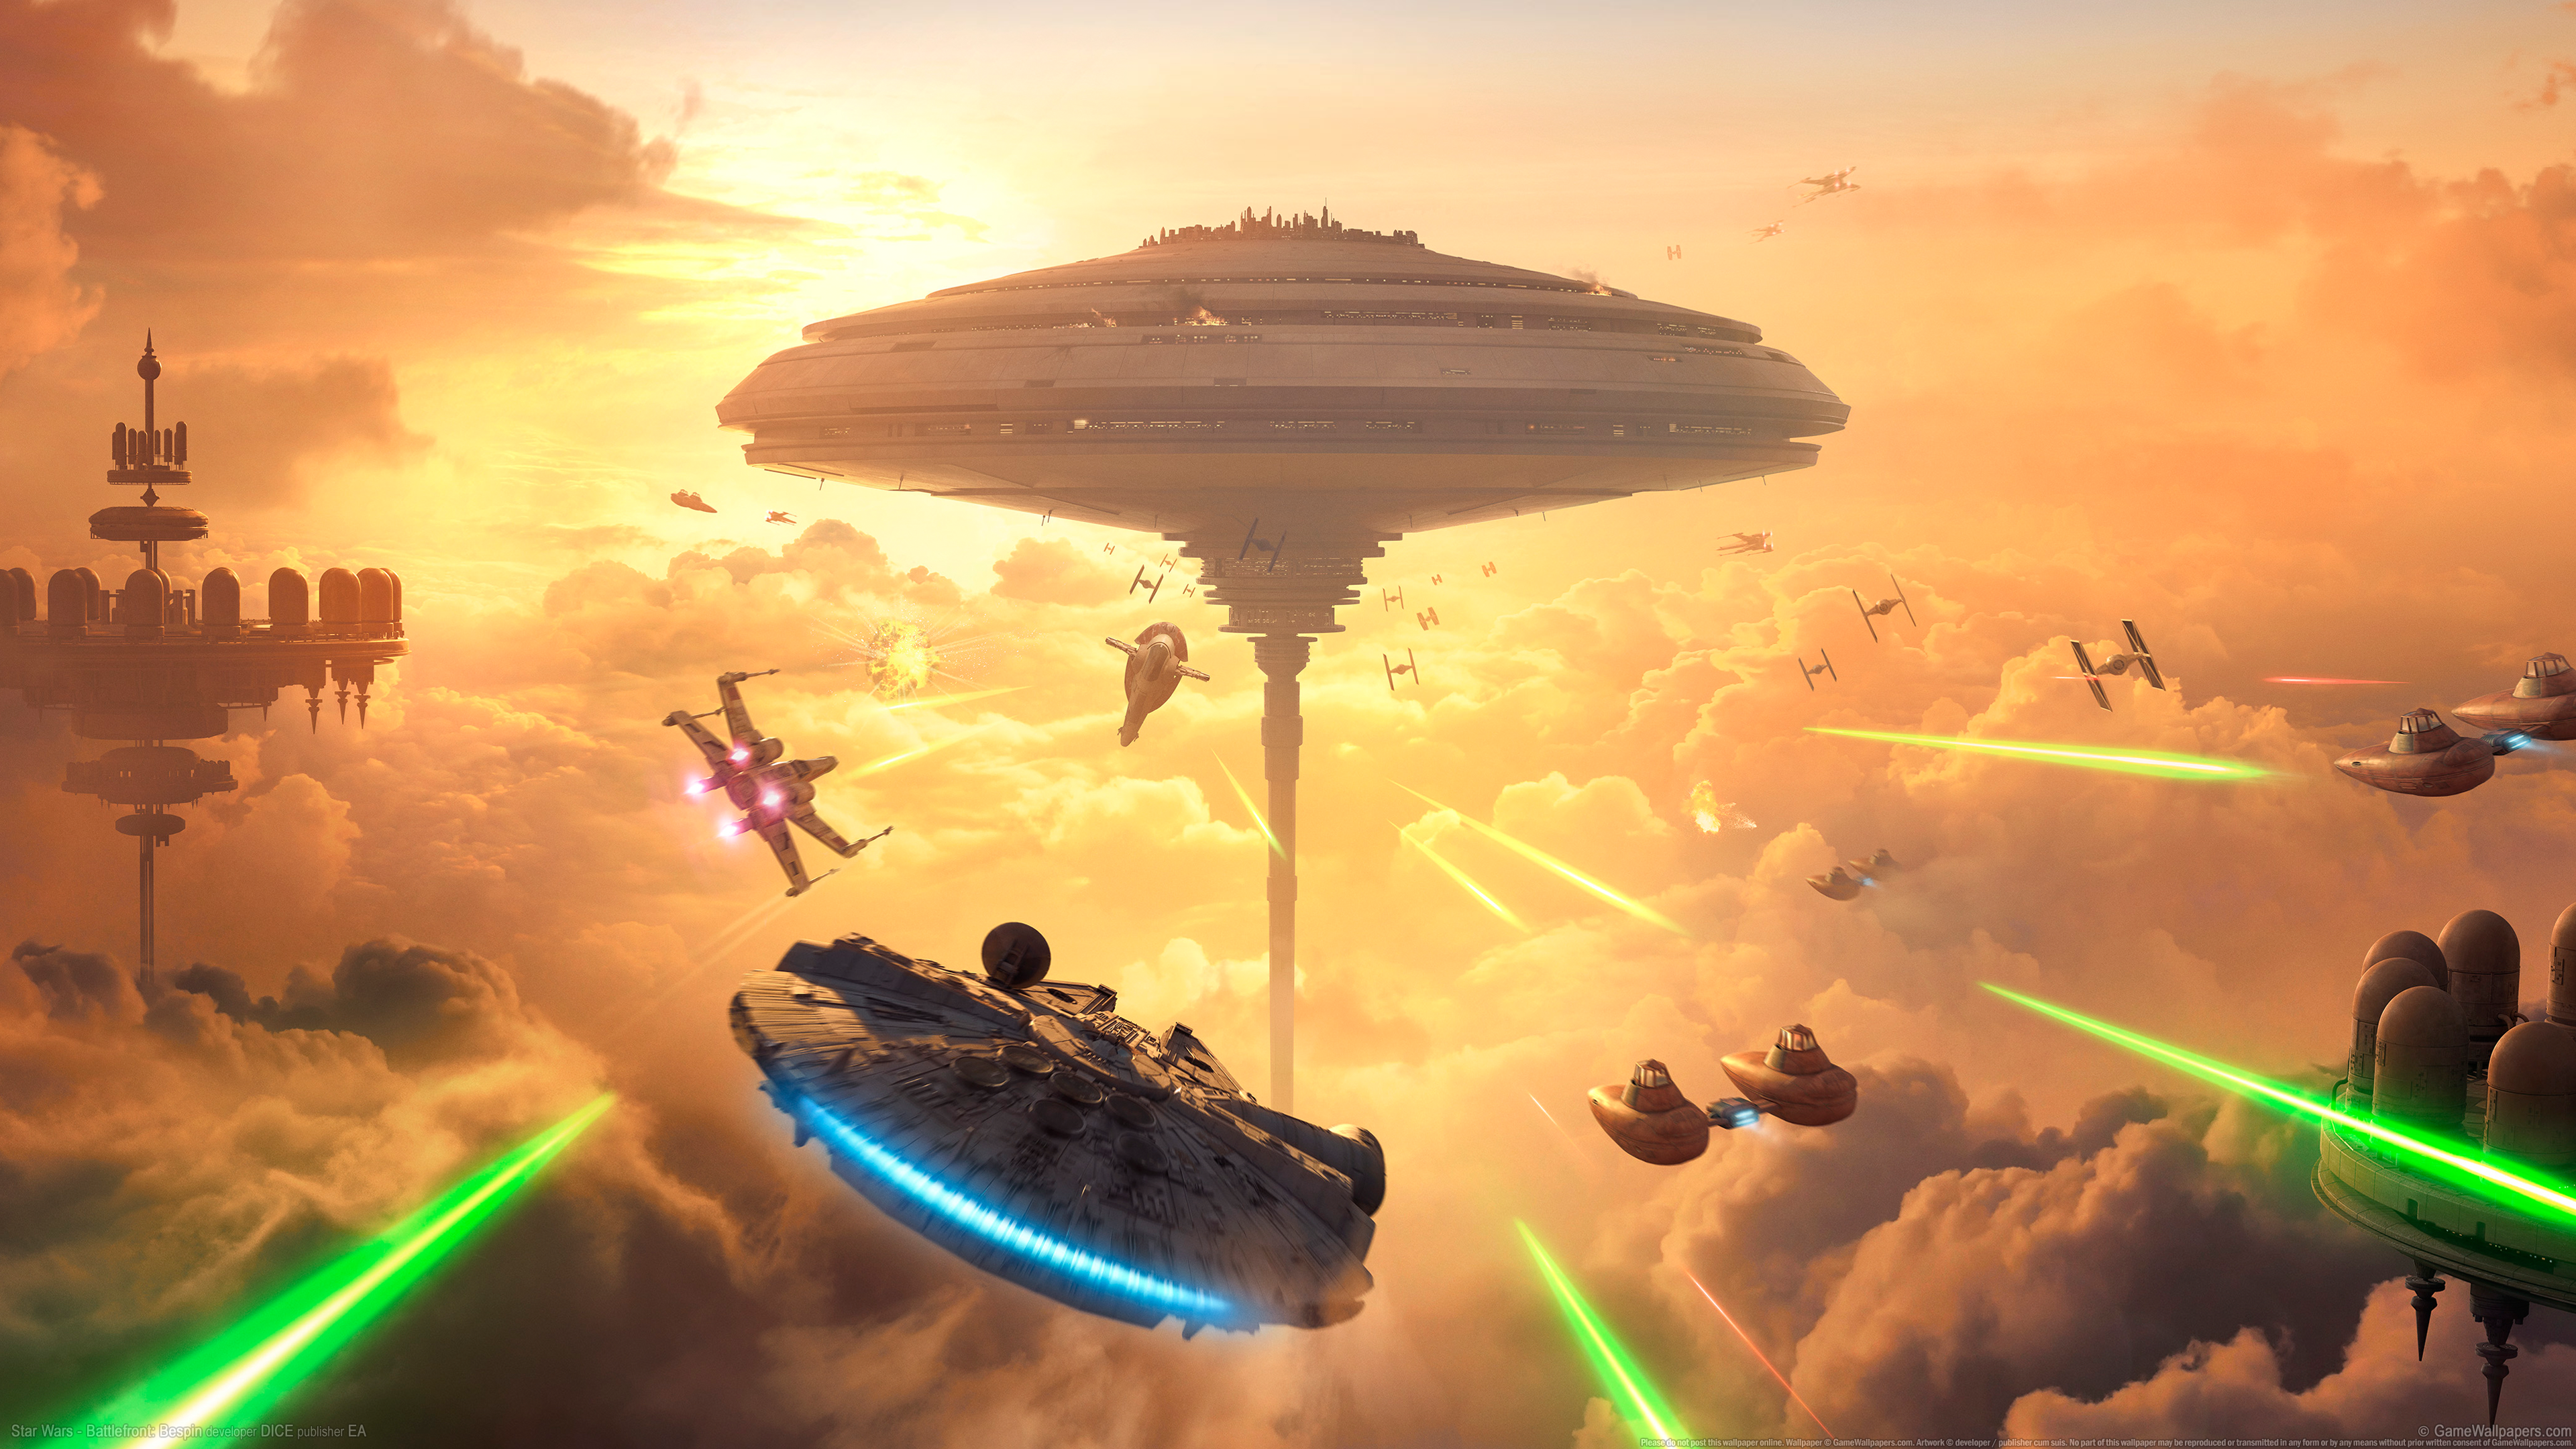 General 3840x2160 Star Wars: Battlefront Bespin Millennium Falcon cloud city video games PC gaming video game art battle science fiction Star Wars Ships Electronic Arts EA DICE